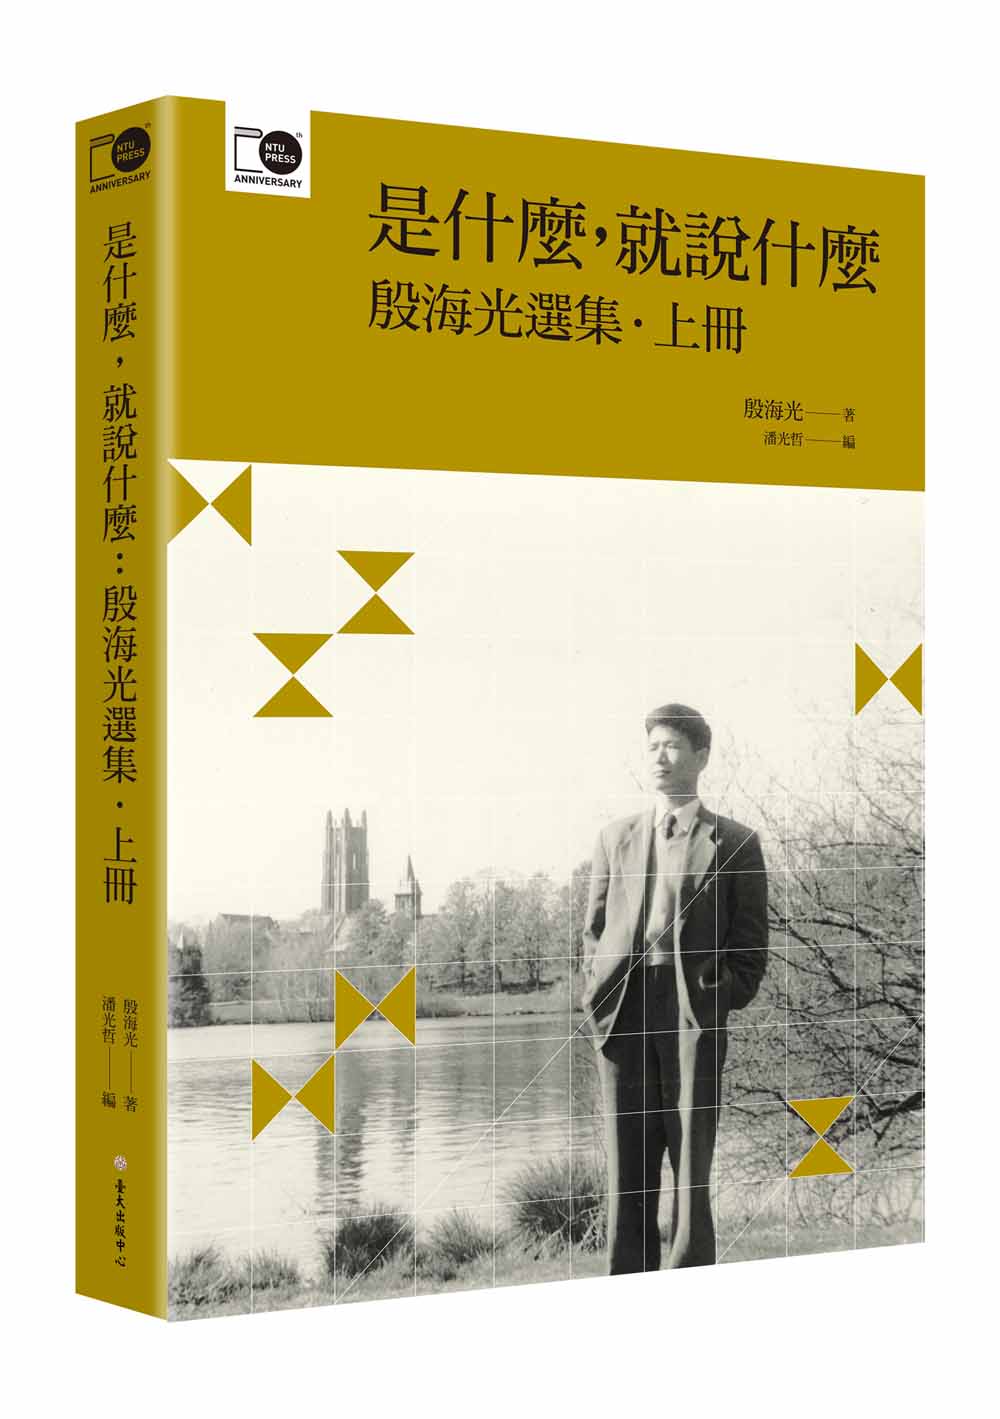 Frankly Speaking: Essential Writings of Yin Hai-guang (Vol. 1)